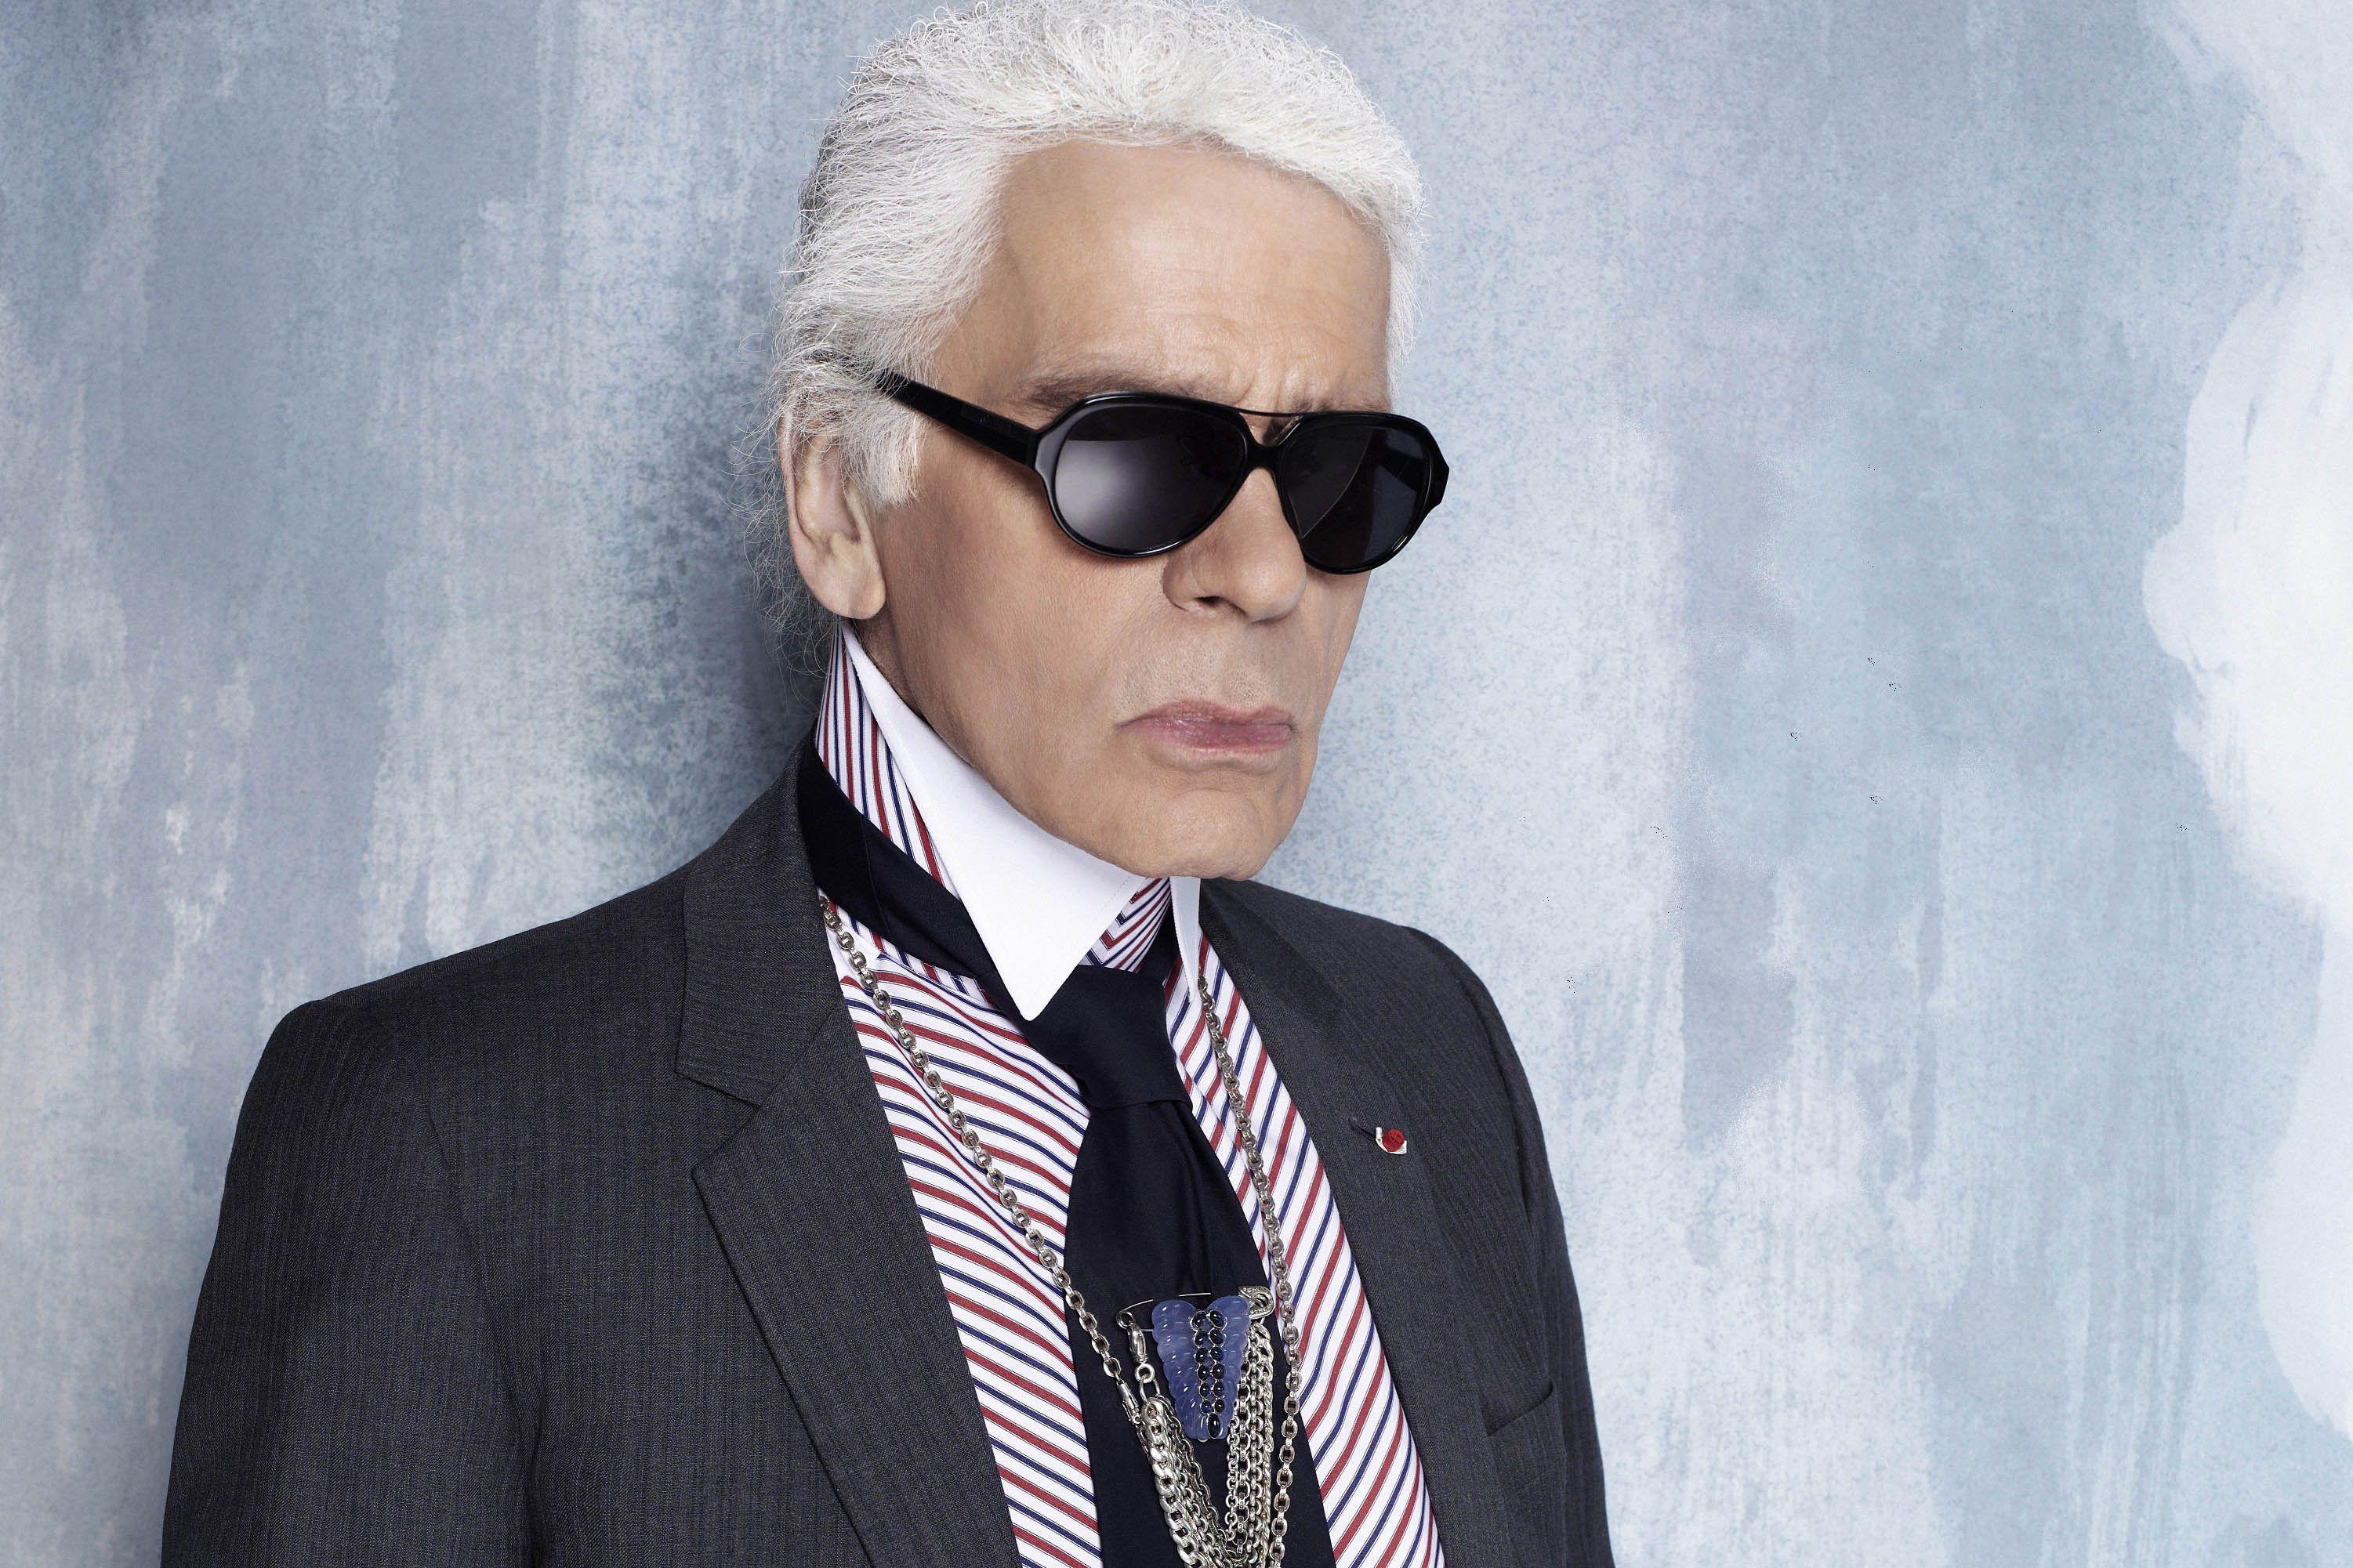 Karl Lagerfeld Wallpaper Image Photo Picture Background